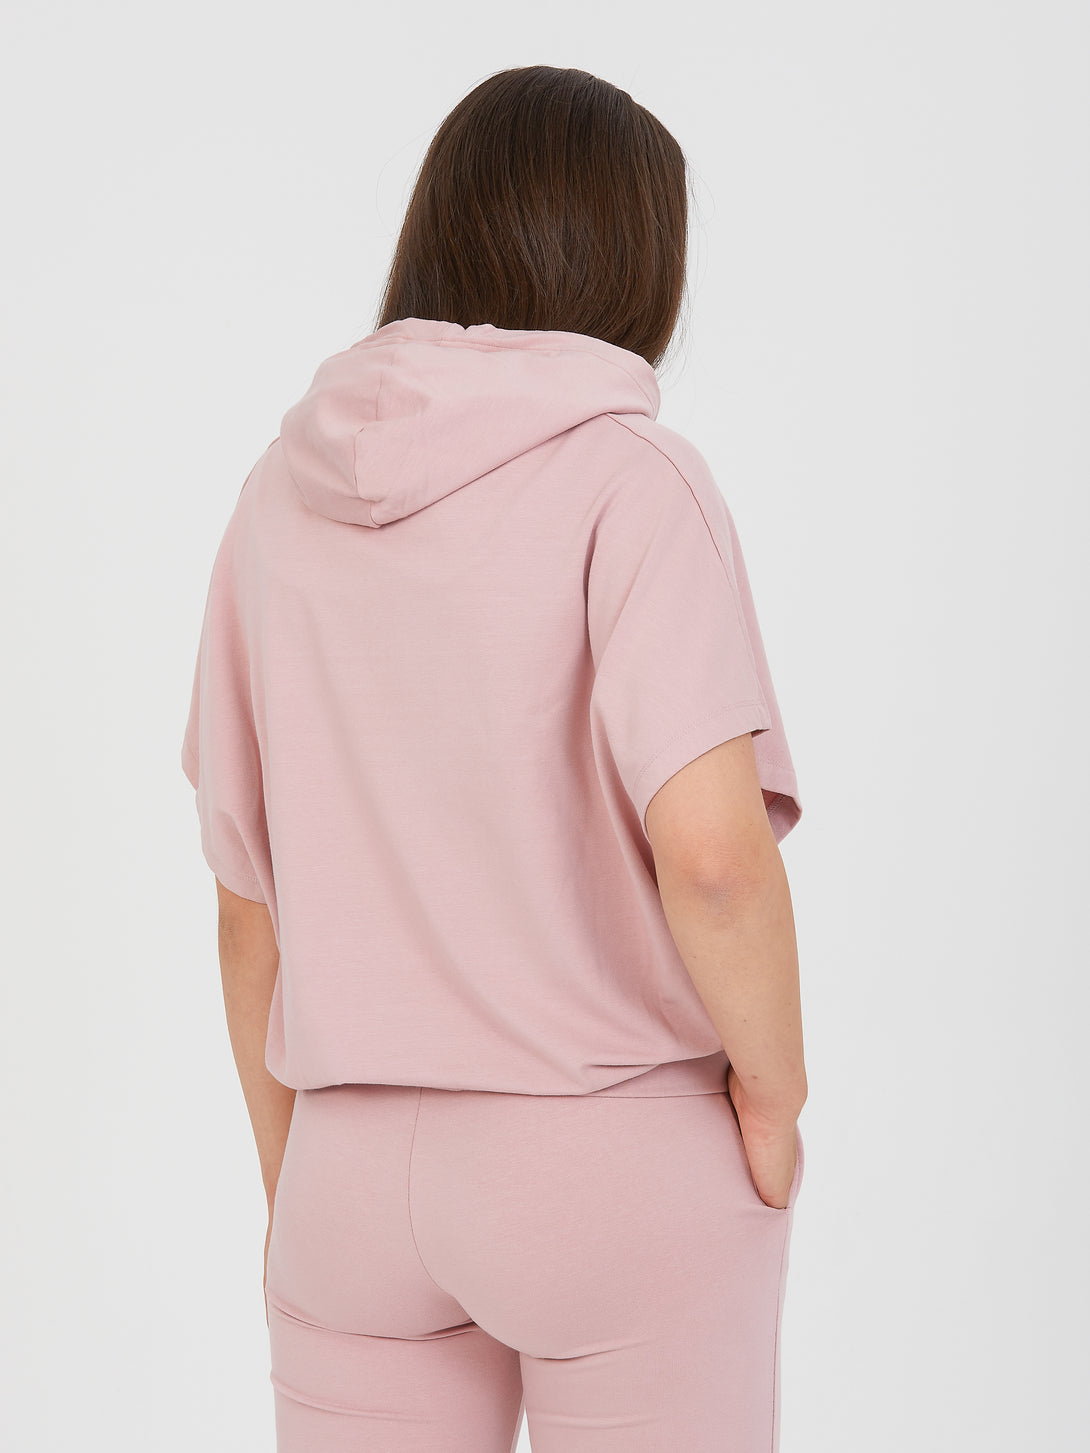 A Woman Wearing Pale Mauve Color All-Day Essential Sweatshirt